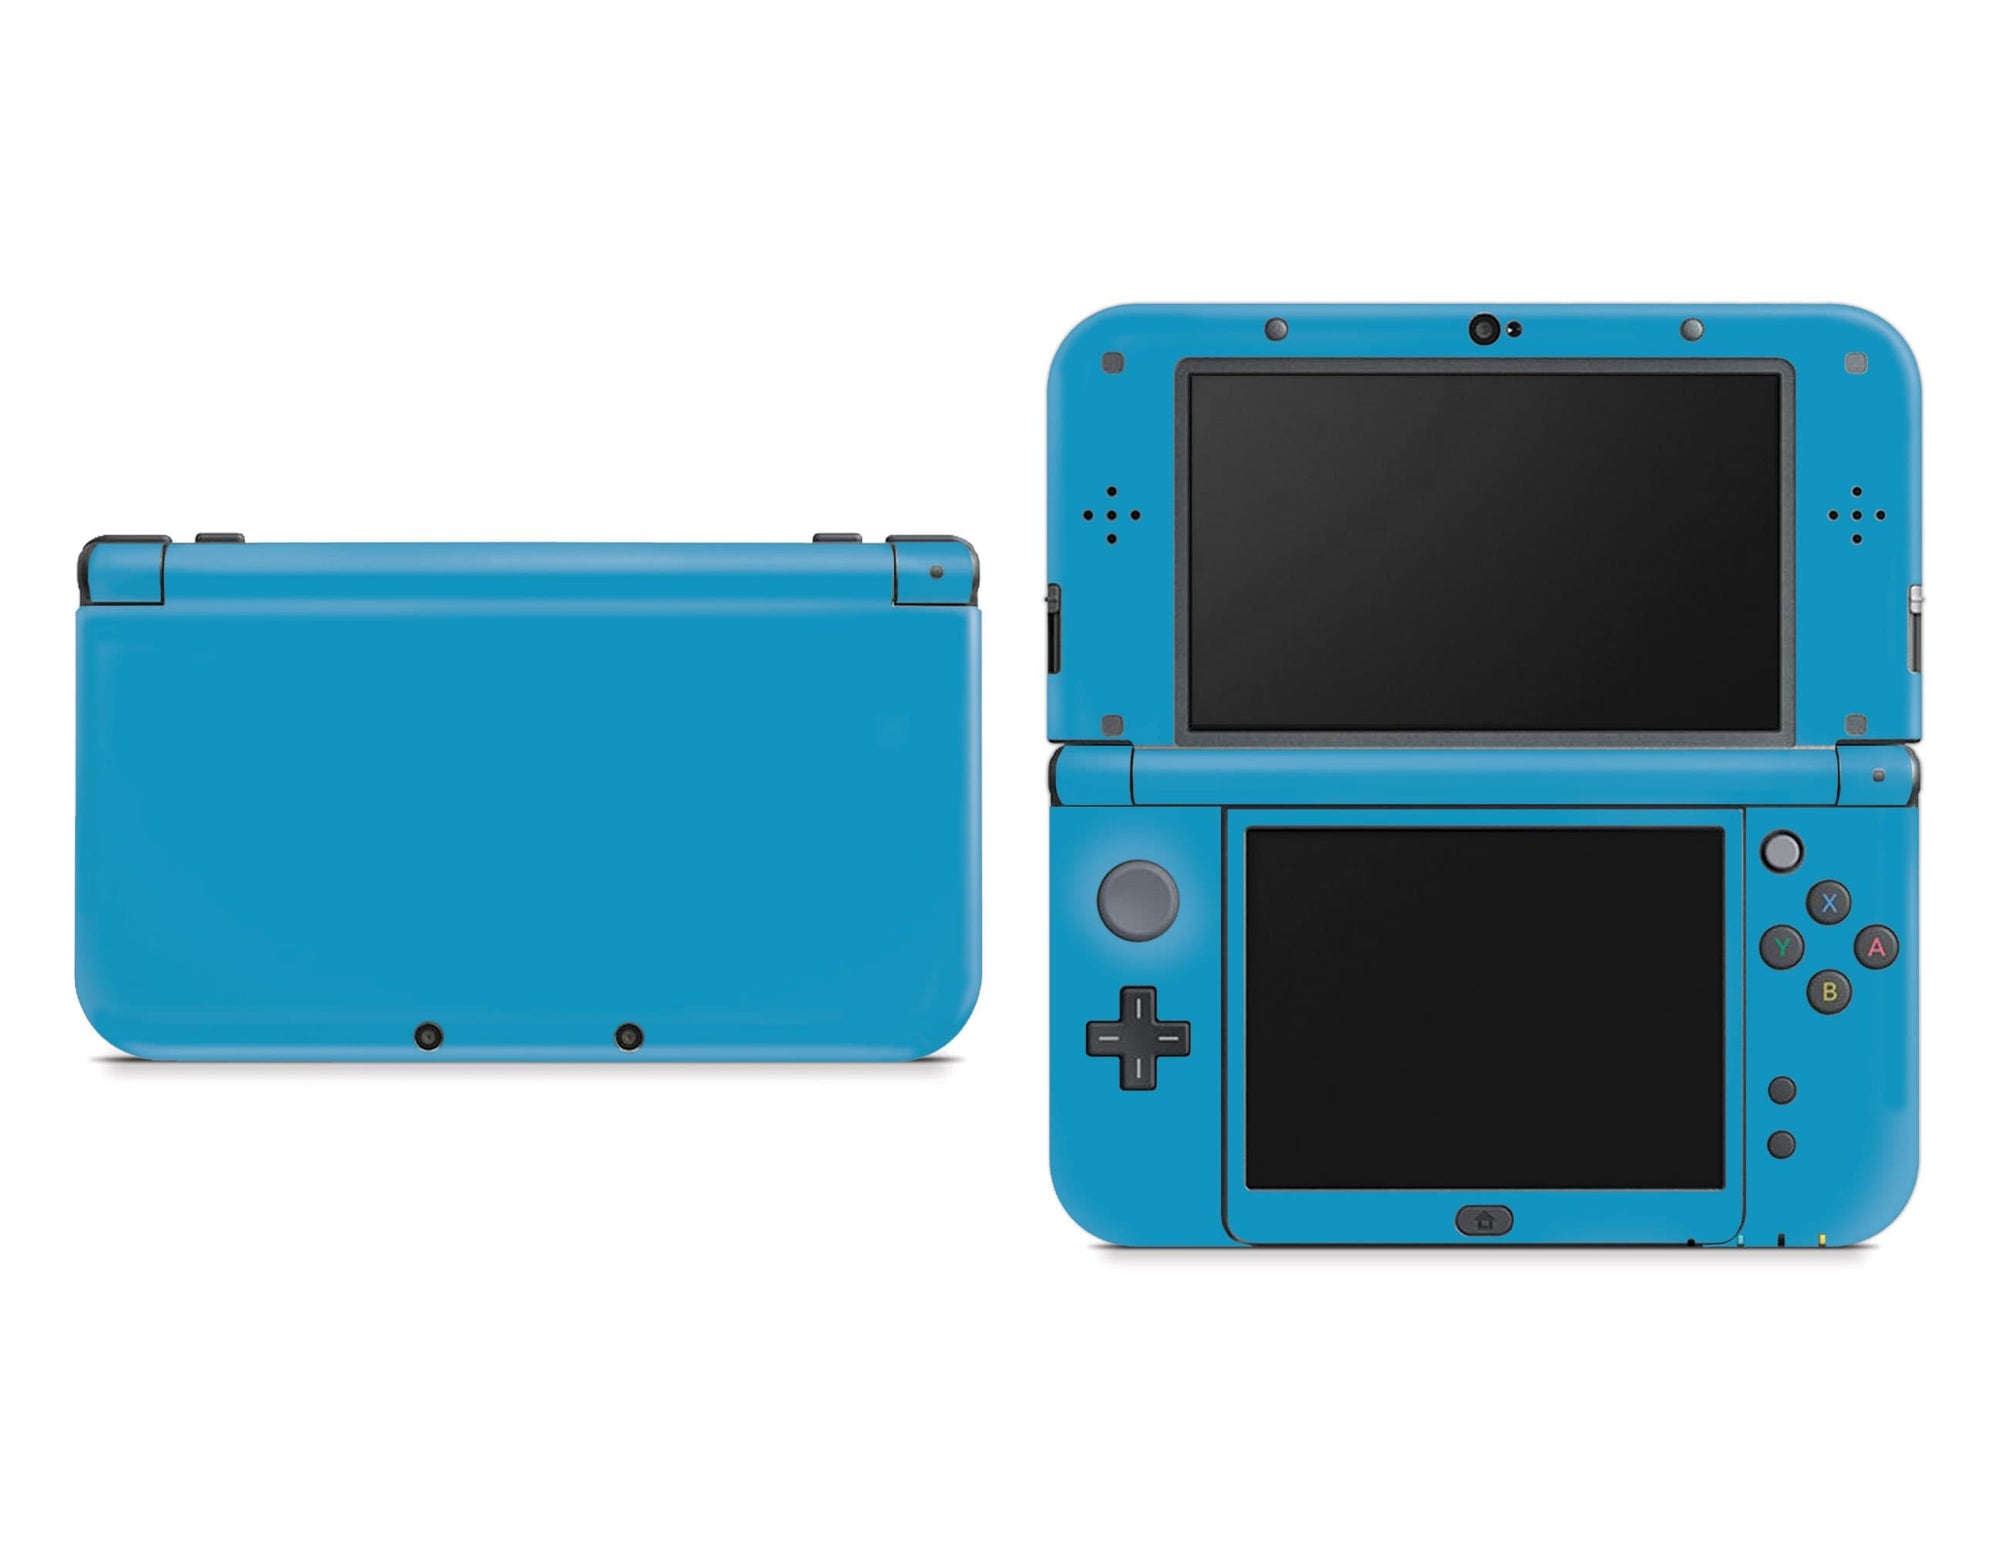 Solid Color Nintendo New 3DS XL | Choose Your - StickyBunny